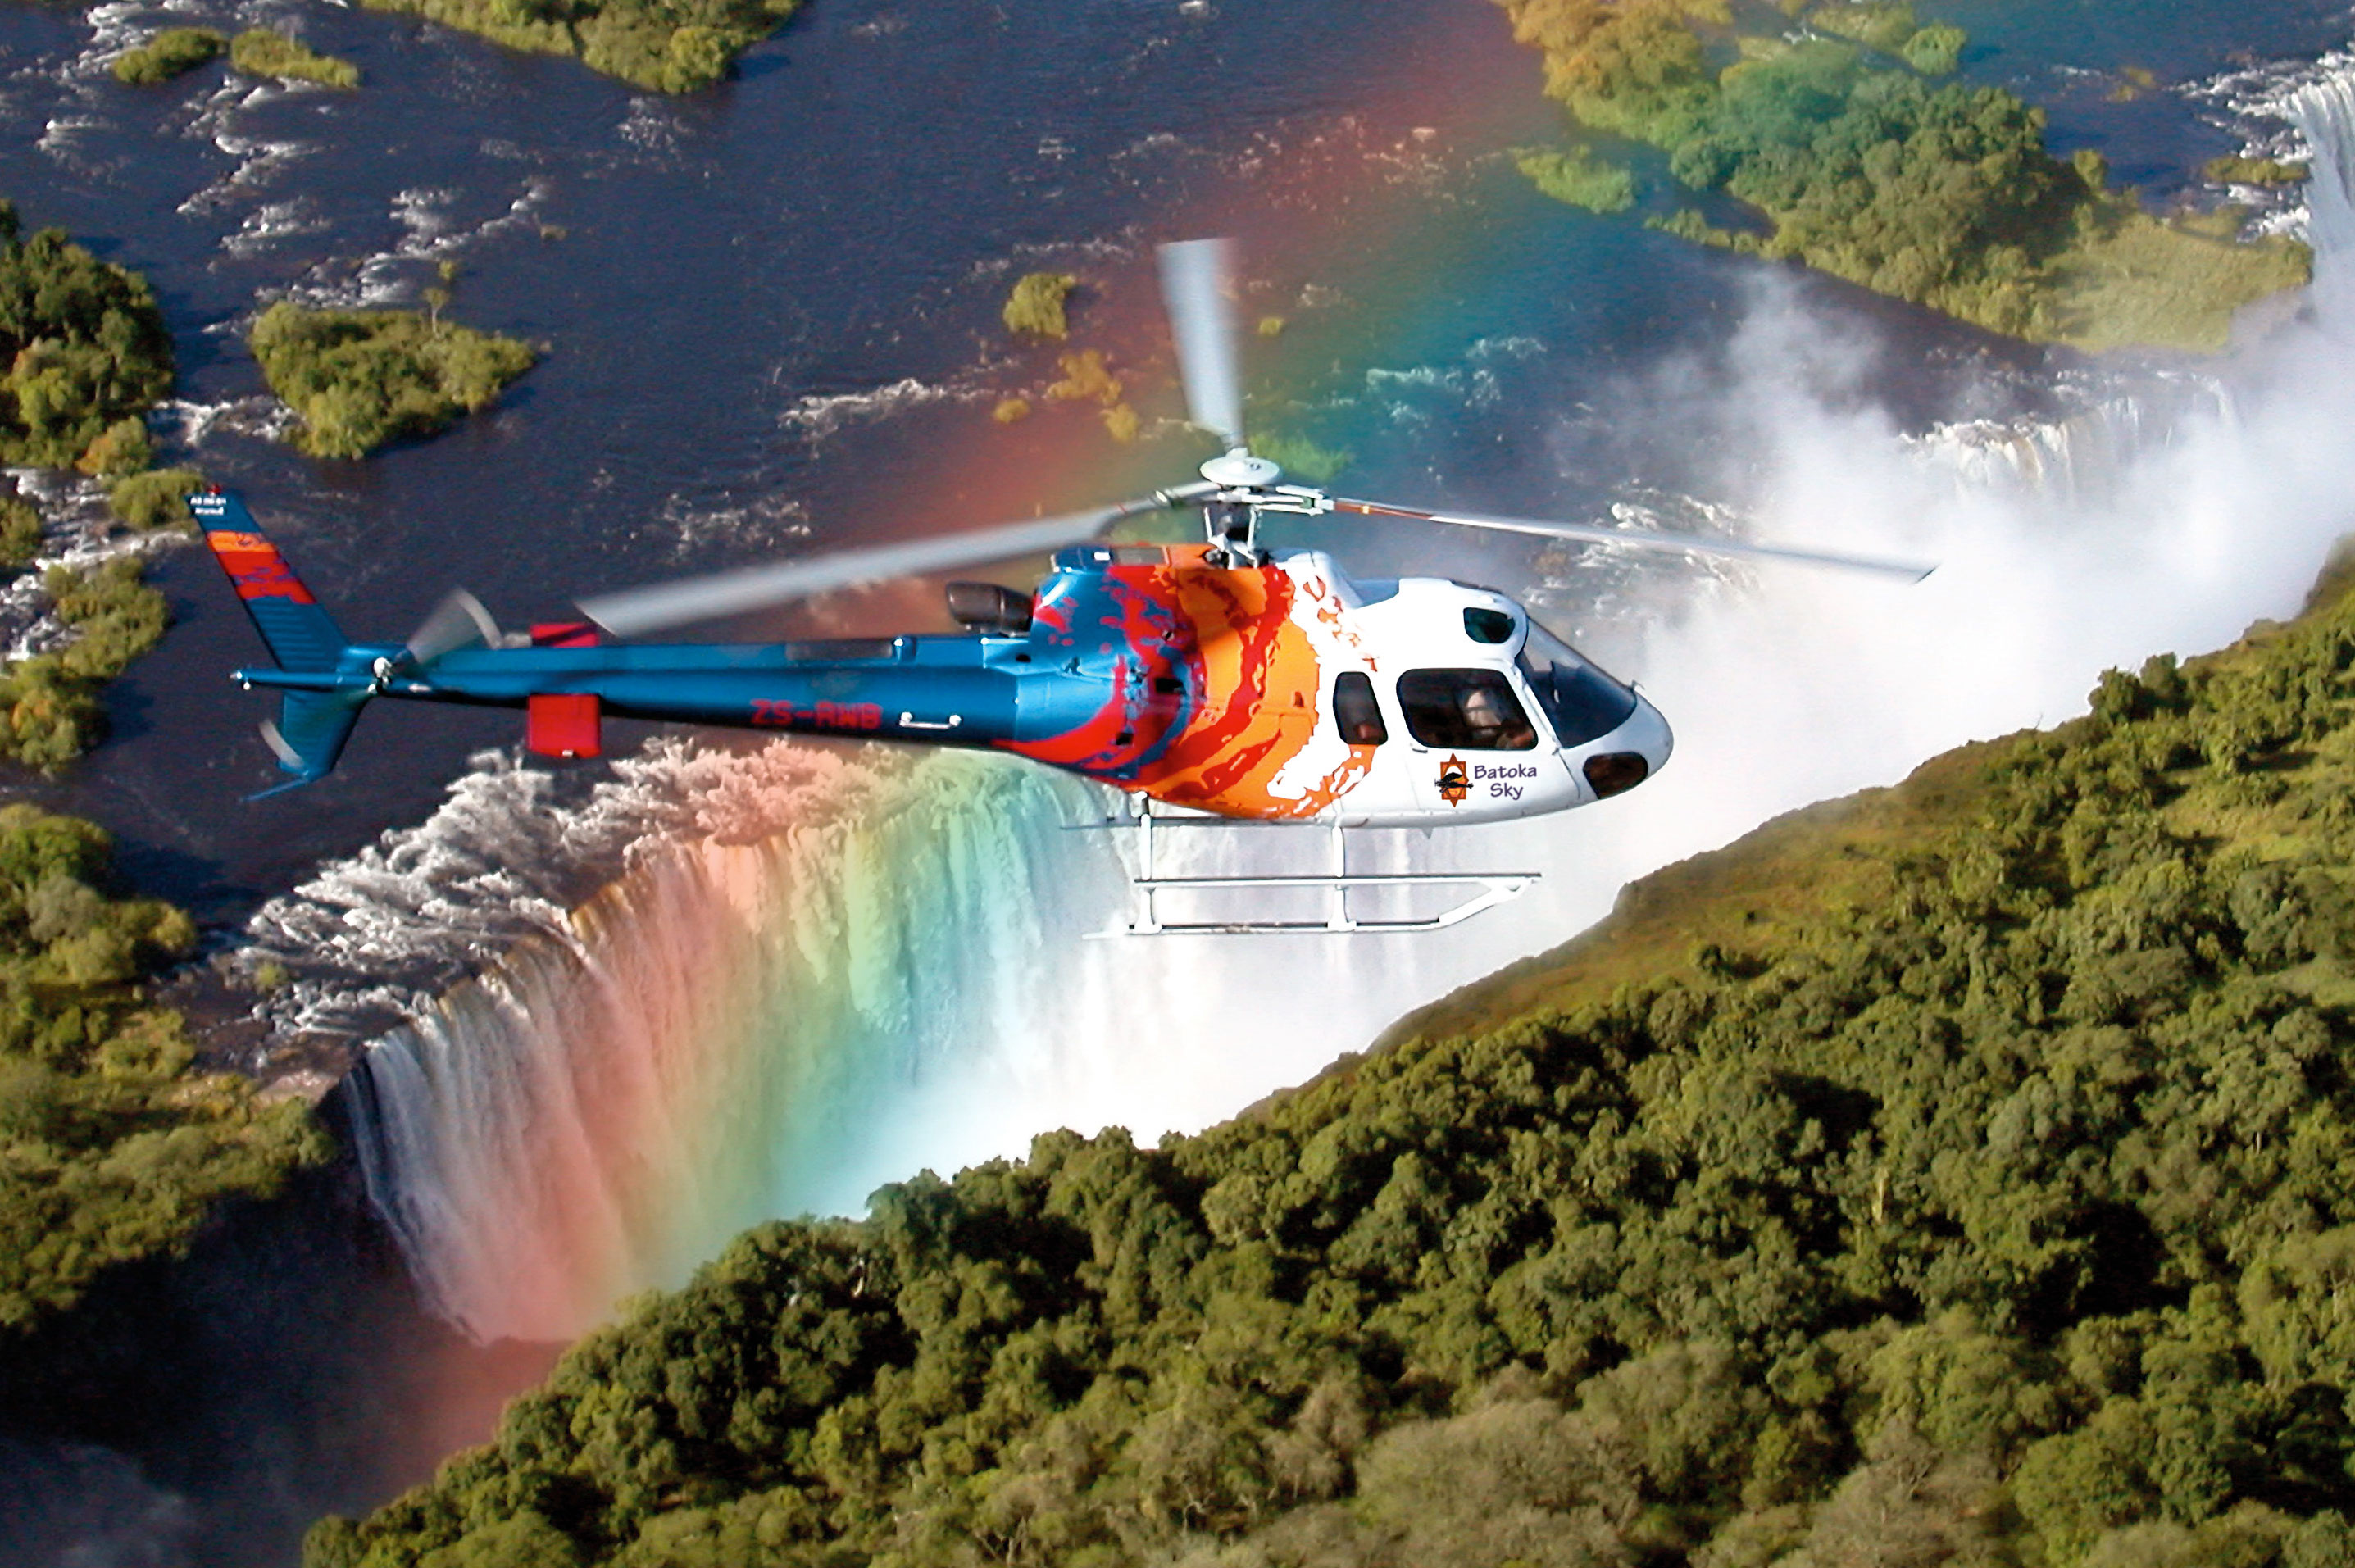 Victoria Falls Flight of the Angels Helicopter Flight in Zimbabwe, Africa | Helicopter Sport - Rated 0.9